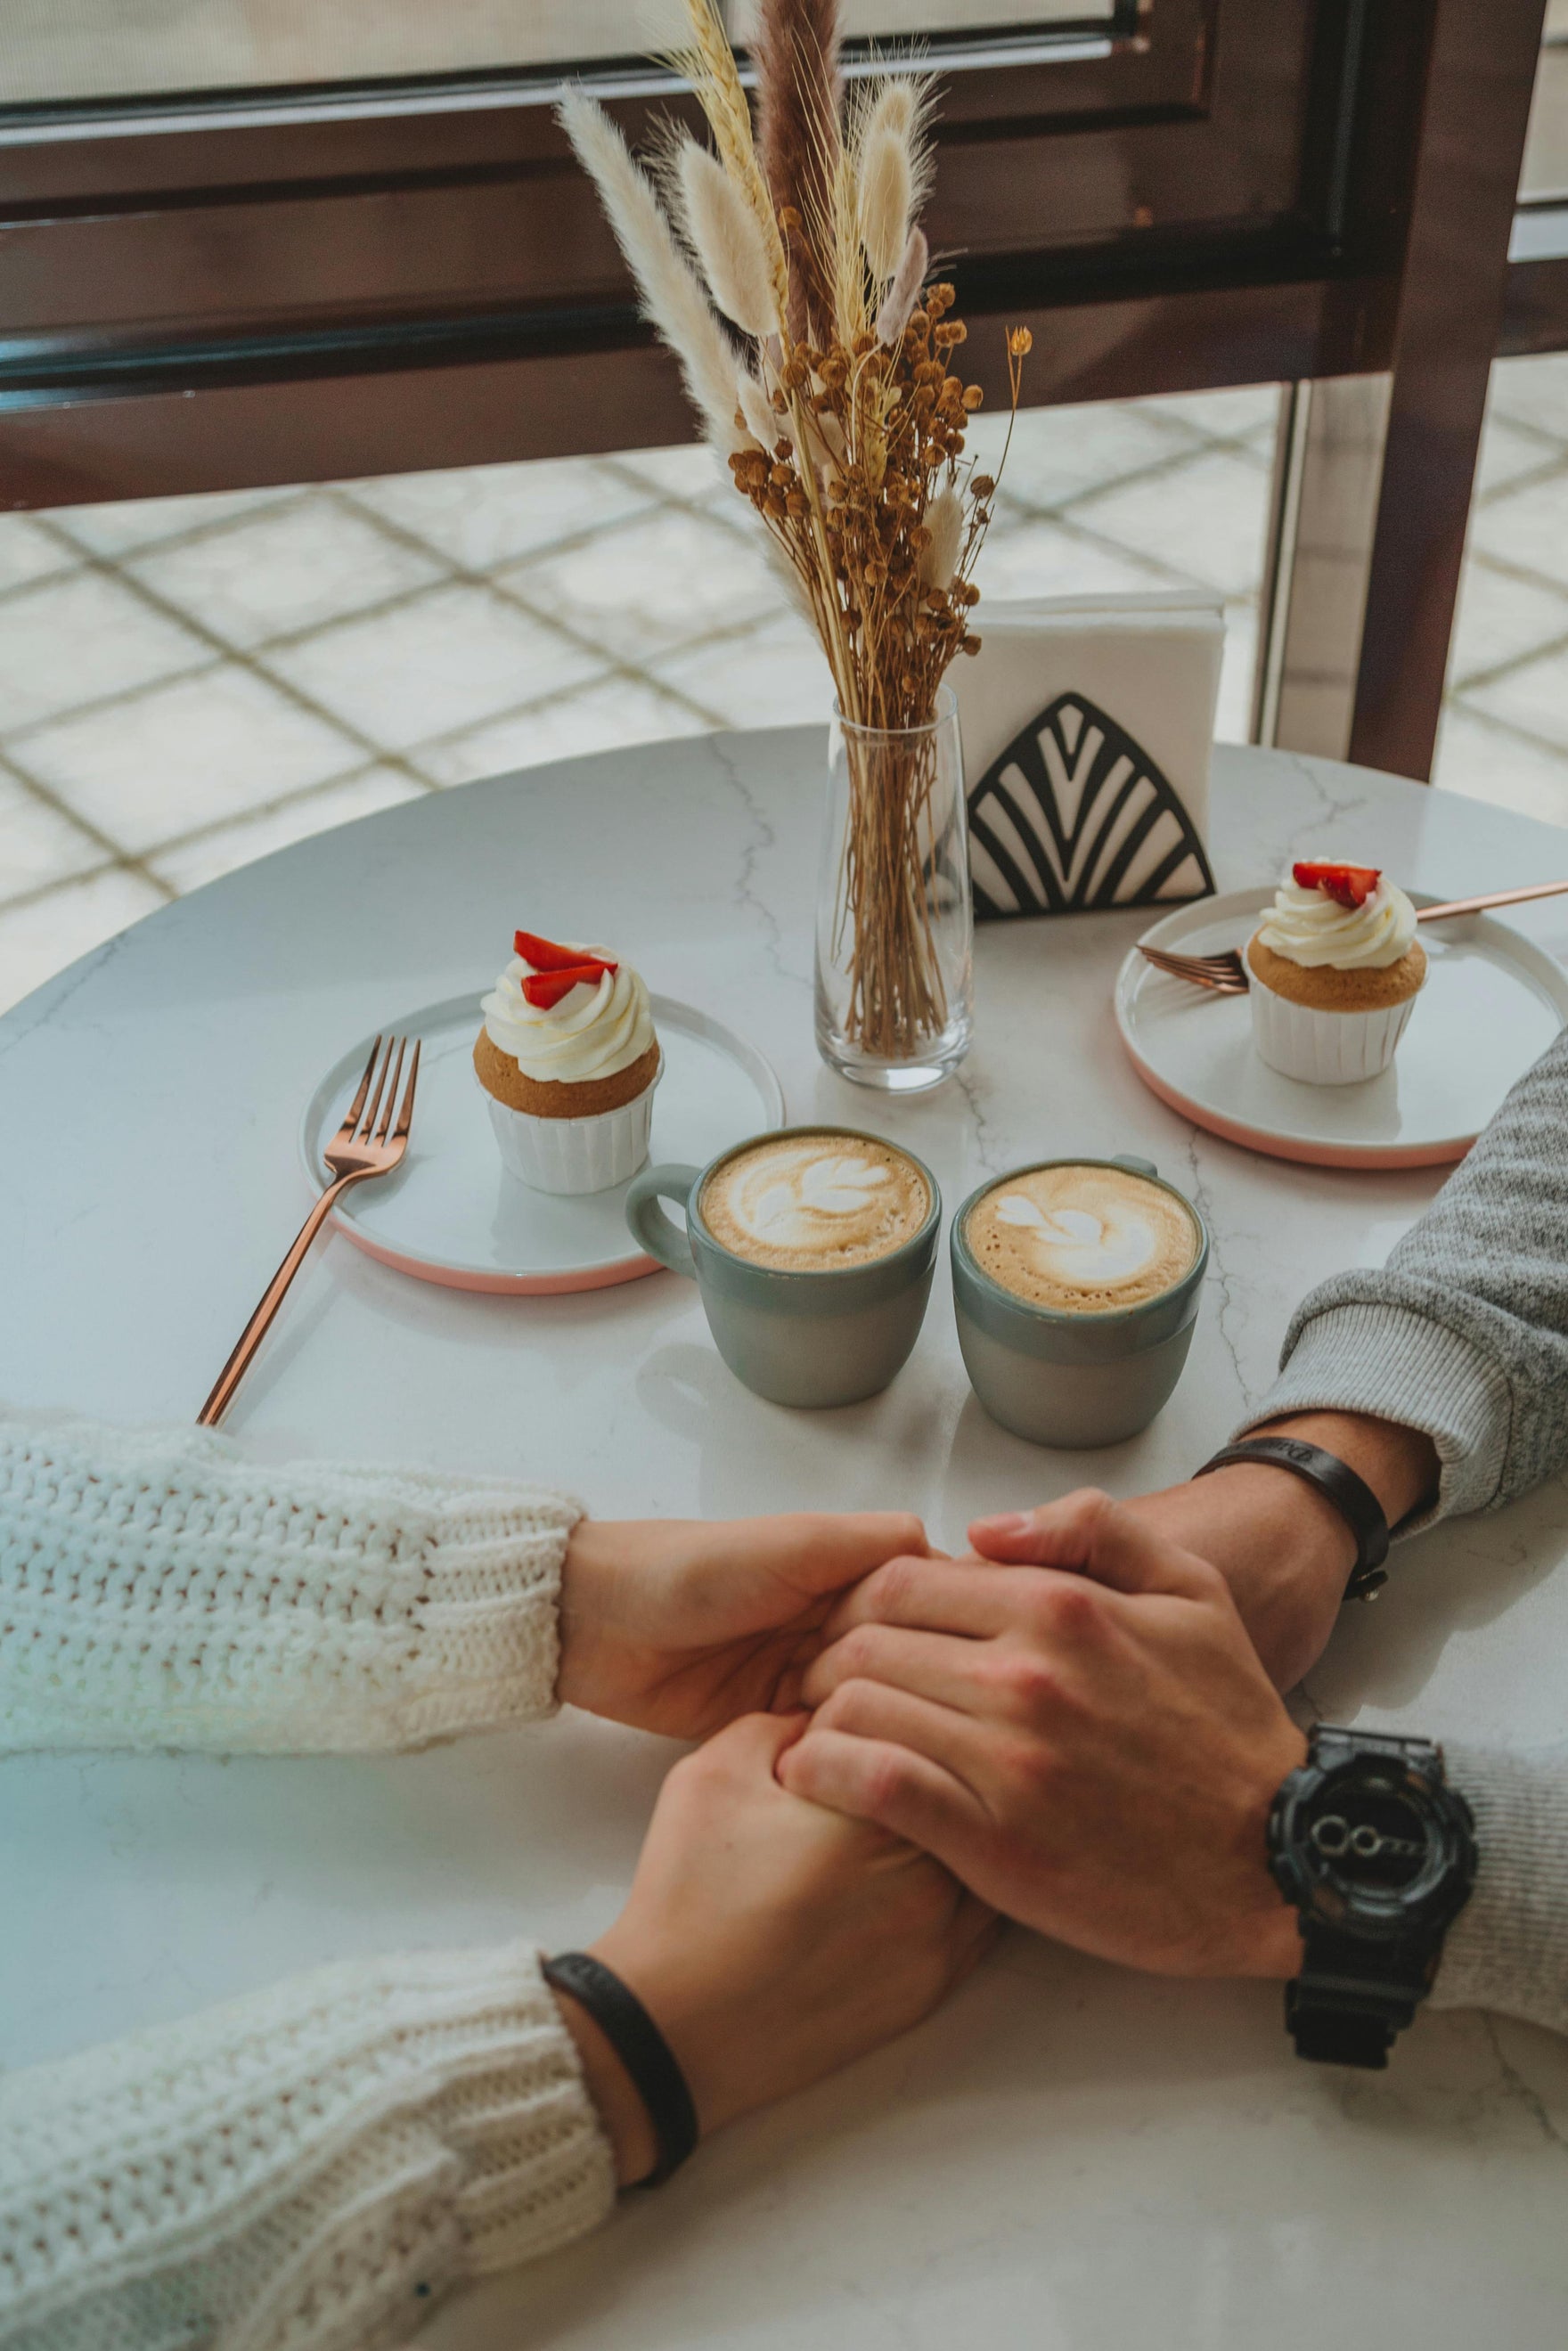 Coffee and Relationships: Brewing Bonds Over a Cup